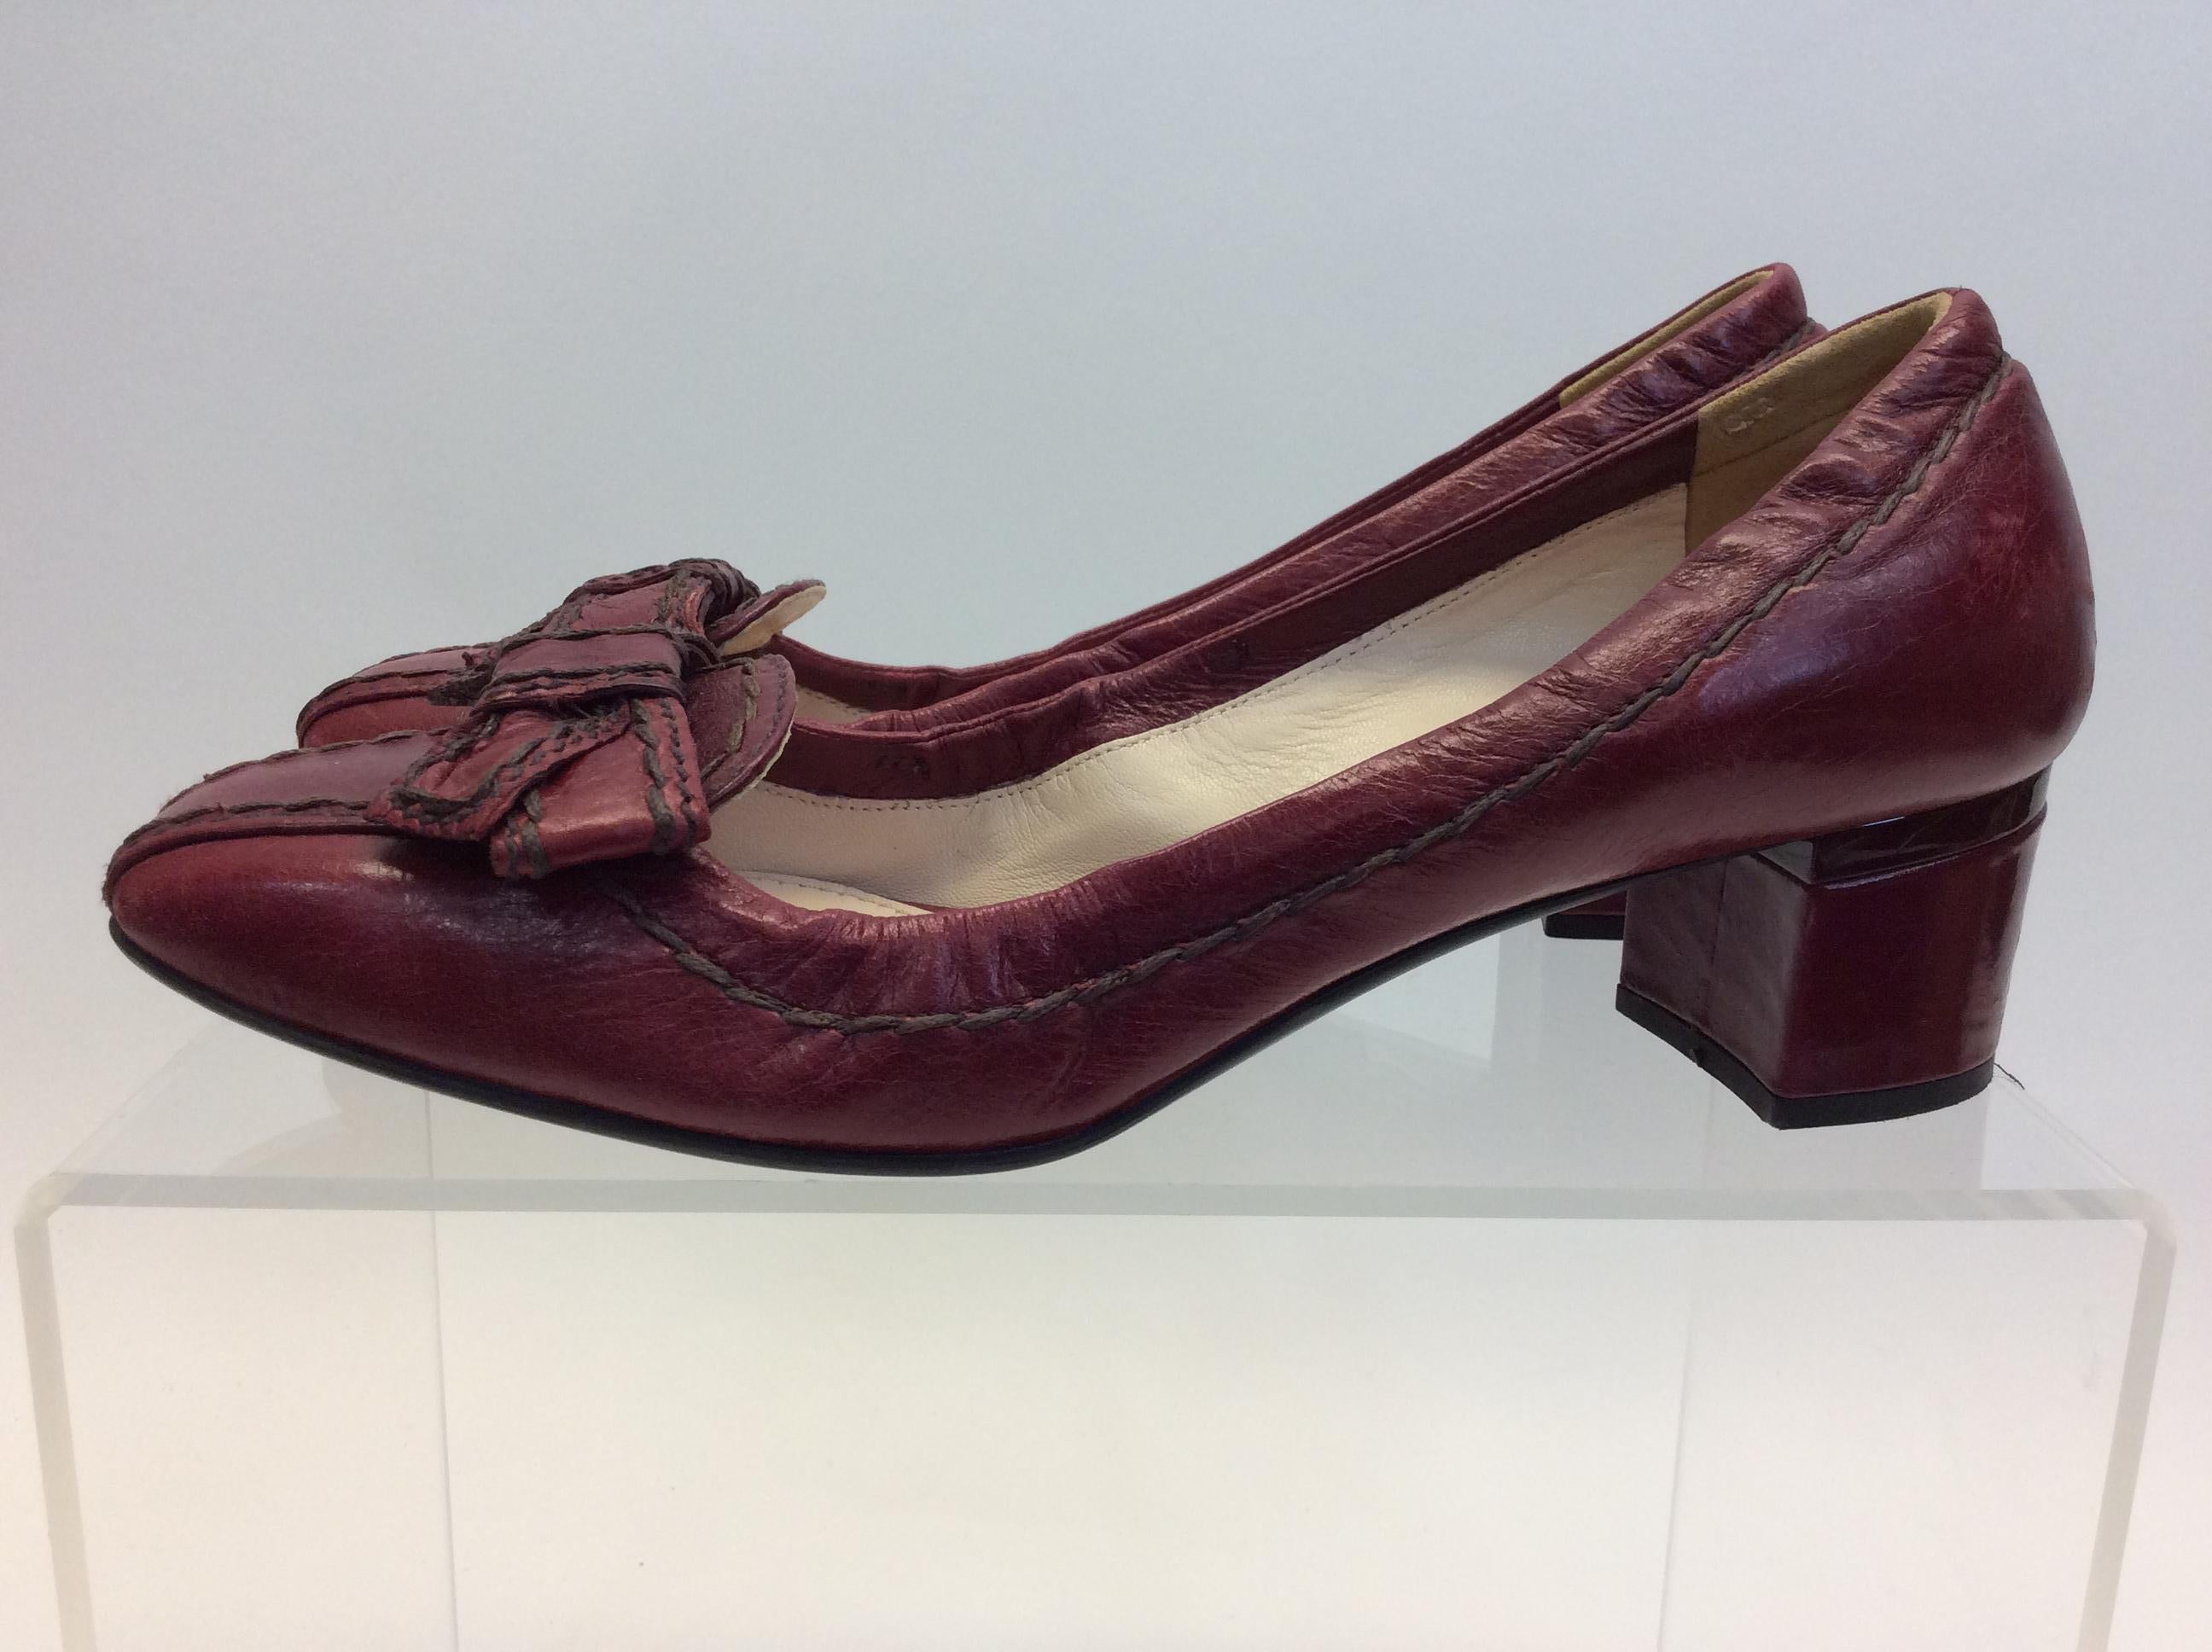 Prada Burgundy Leather Bow Heels
$165
Made in Italy
Leather
Size 37.5
1.75